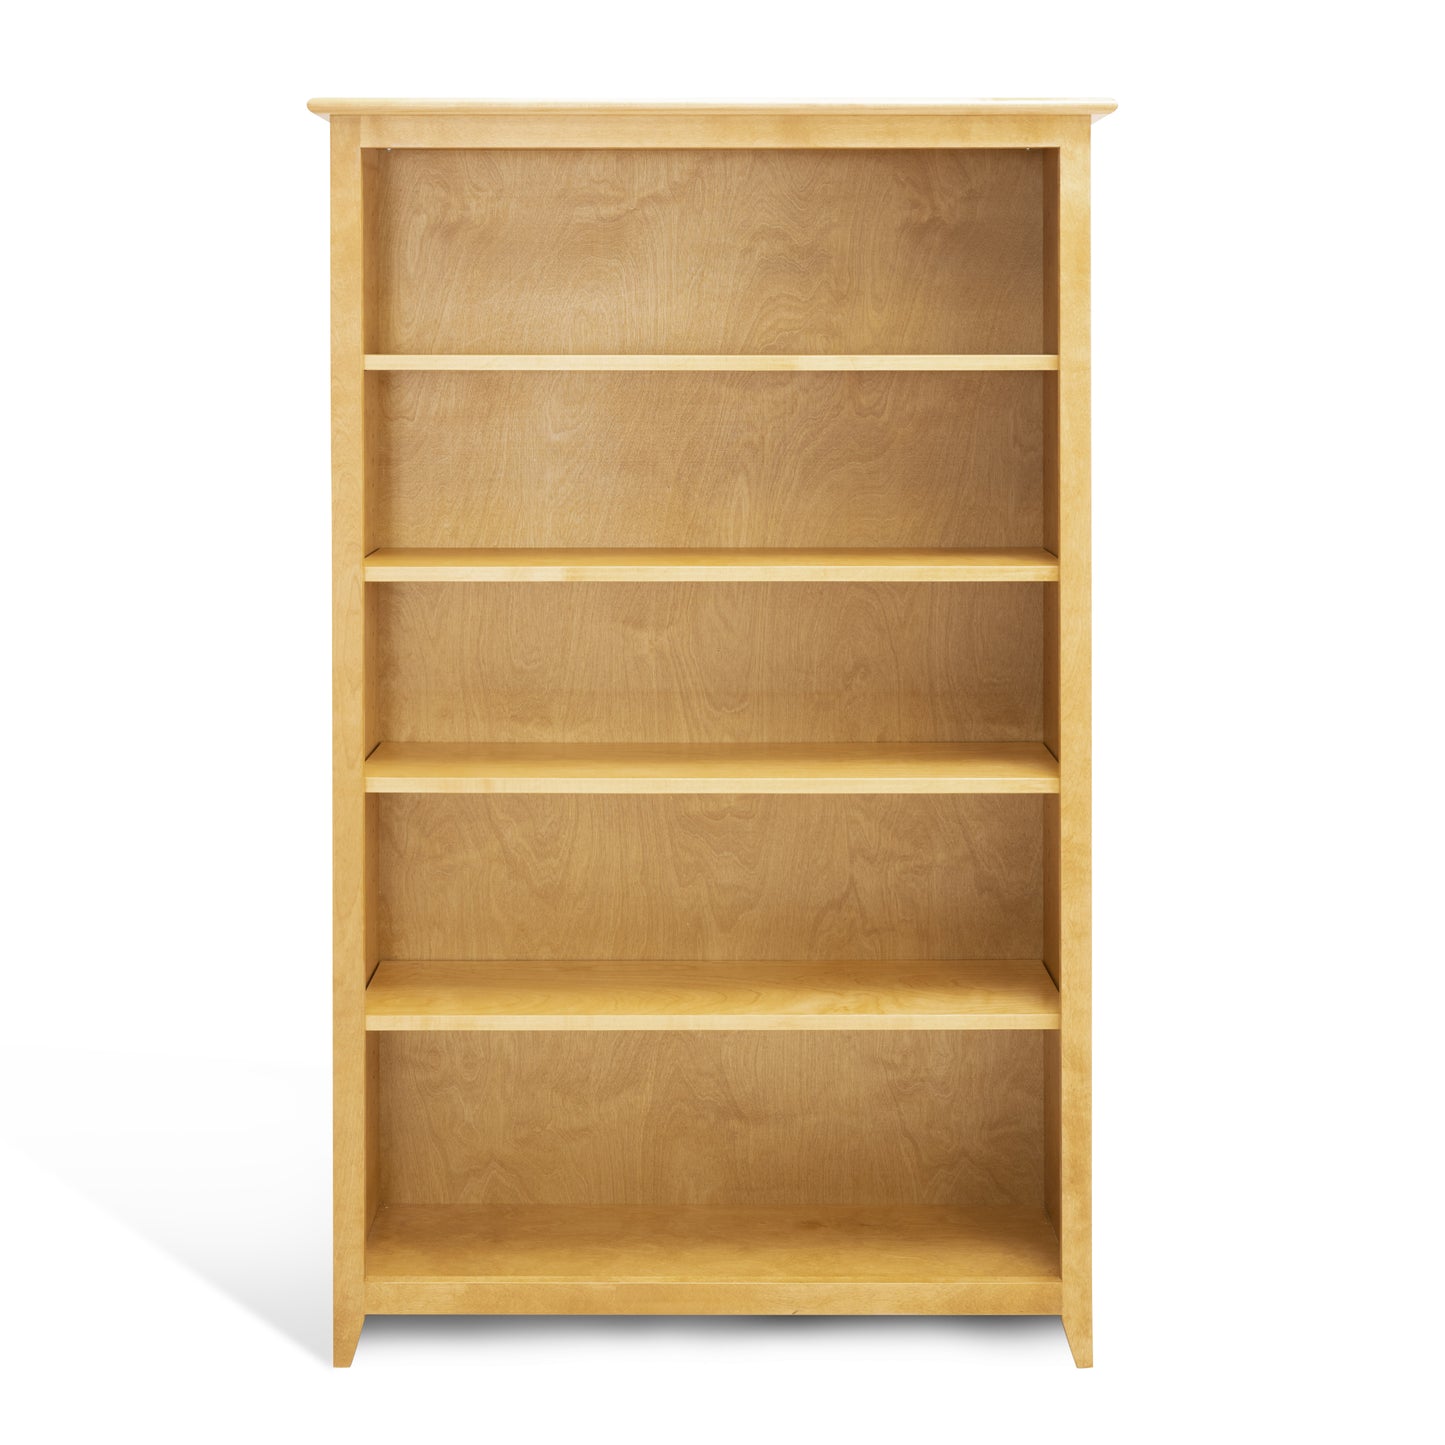 Acadia Shaker Bookcase built with birch featuring shelves that are adjustable. Shown in Autumn Gold finish.